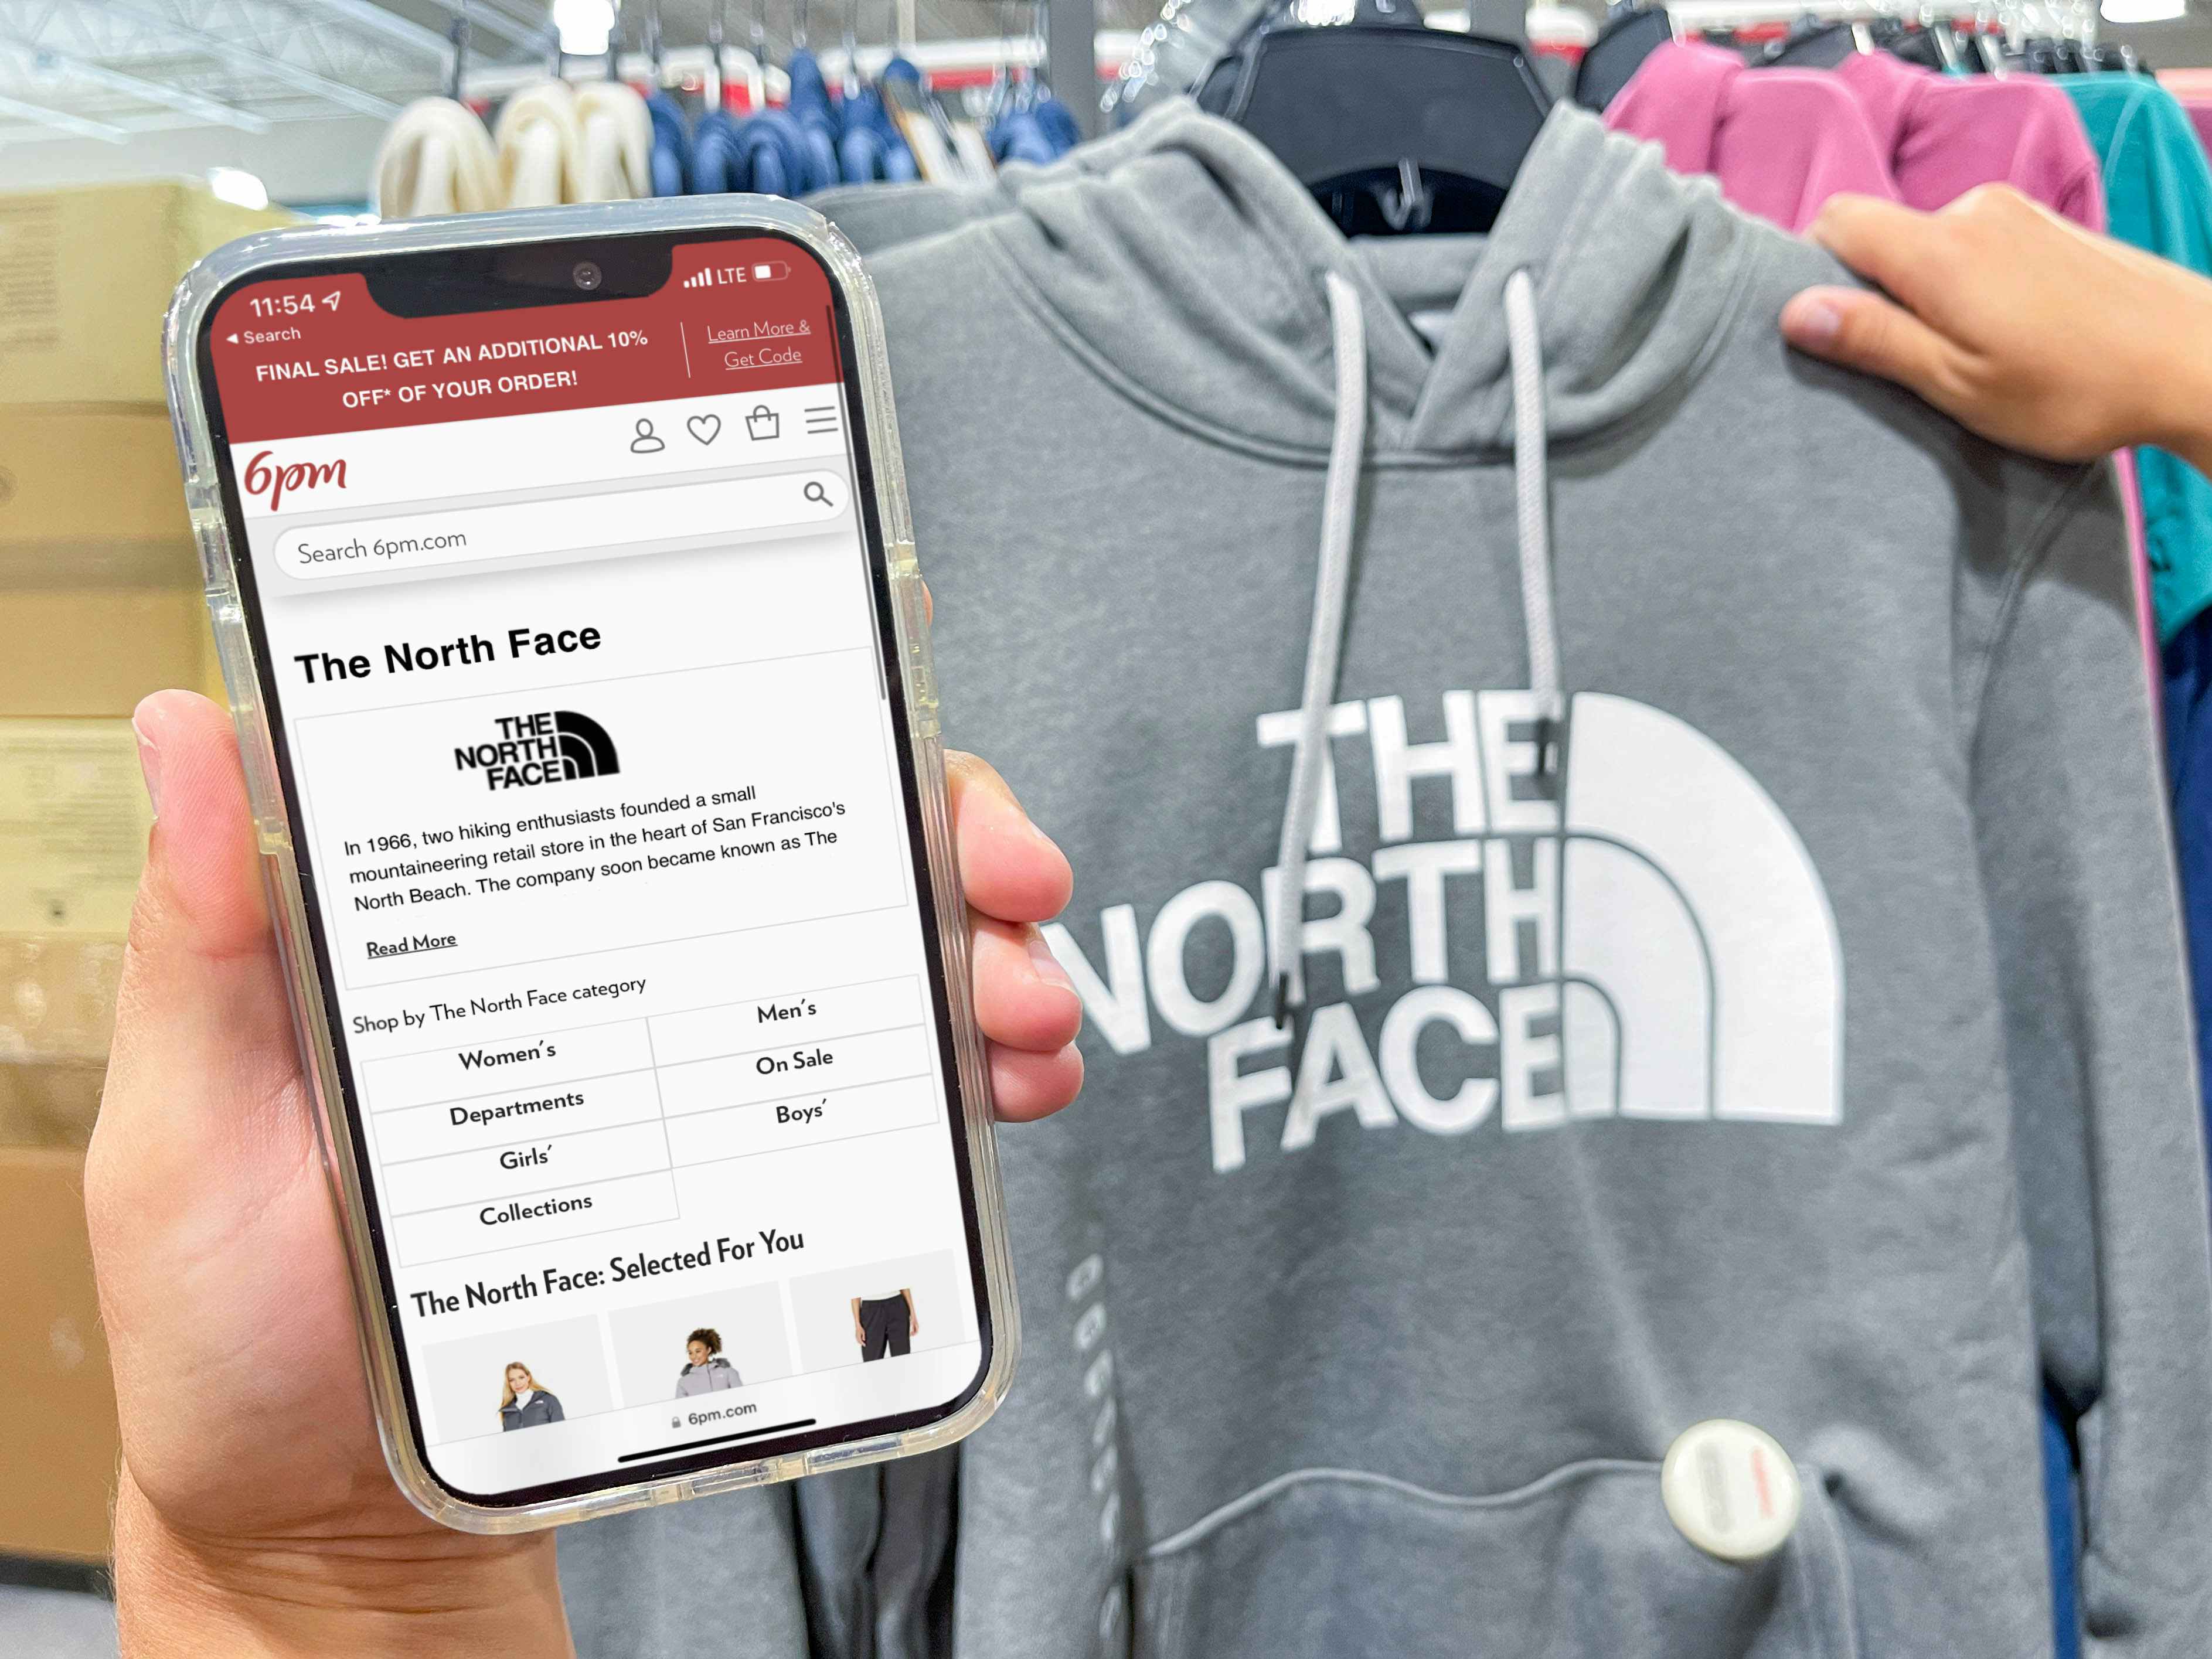 north face on 6 pm app on cellphone screen in front of north face sweatshirt